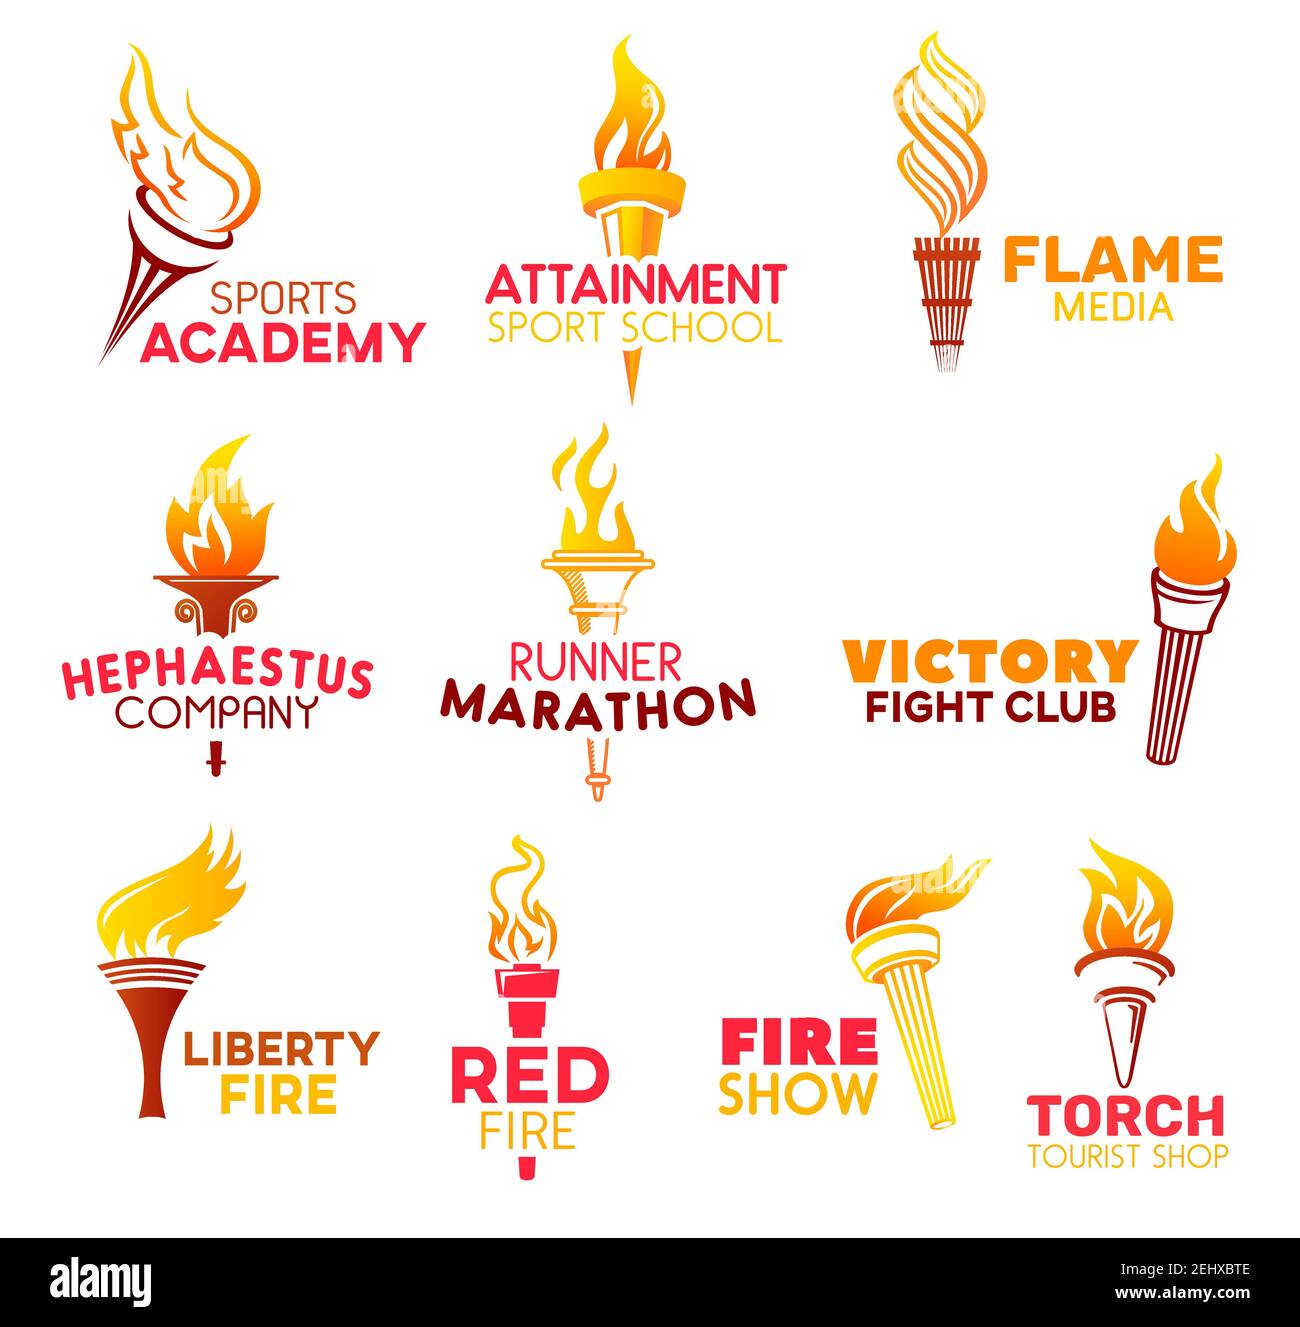 Torch icons and symbols vector icons. Sports academy and attainment sport school, media flame, Hephaestus company. Runner marathon, victory fight club Stock Vector